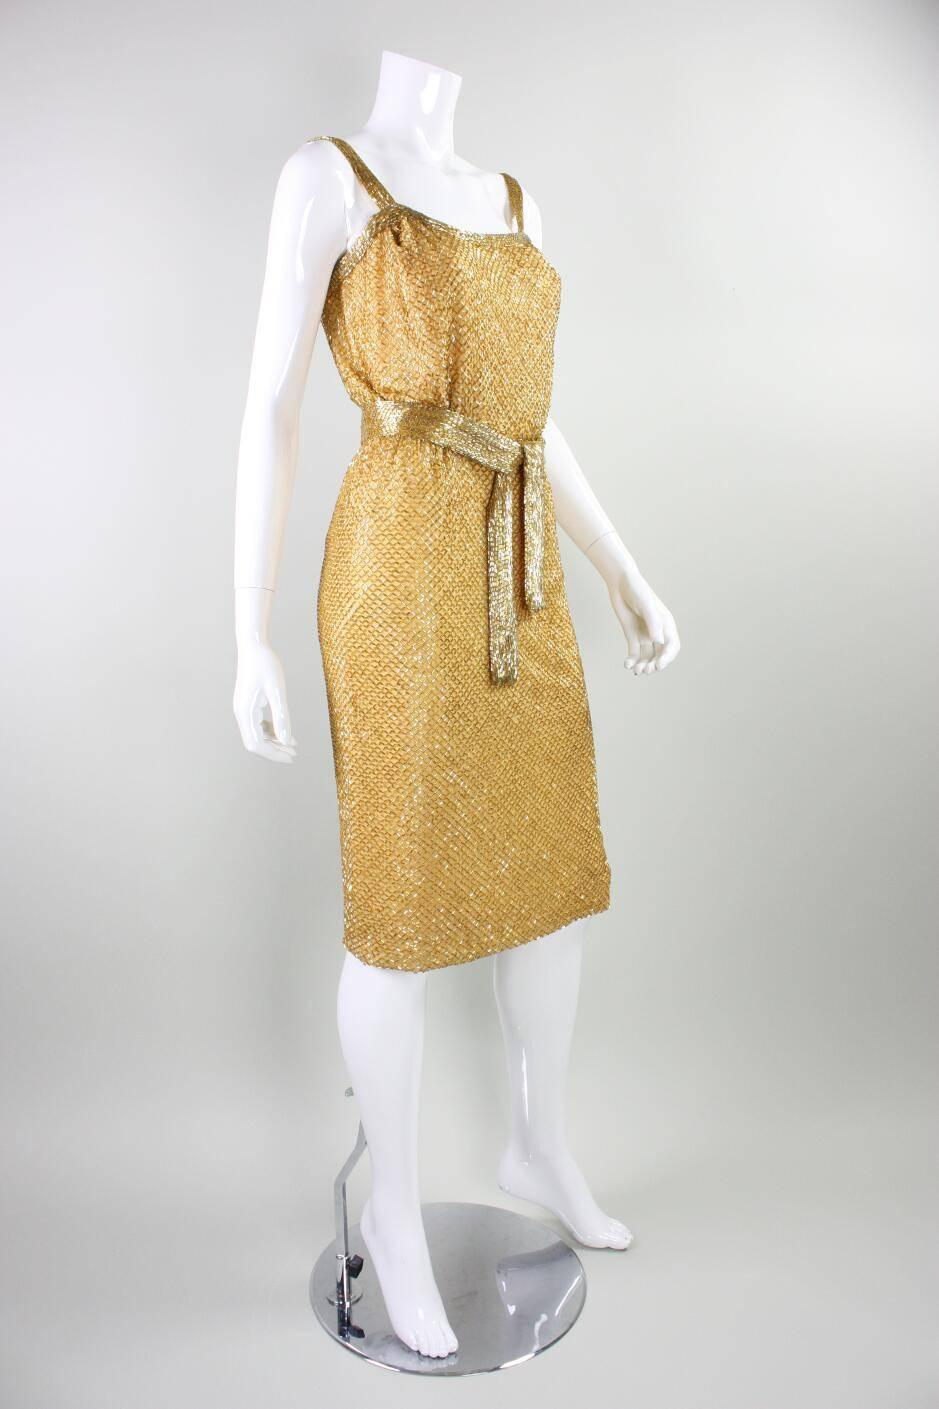 Vintage dress from Ceil Chapman dates to the 1950's and is made of marigold chiffon with all-over gold bugle beading.  Fitted throughout.  Lined.  Center back zipper.  Detached beaded belt.

Measurements-

Bust: 34